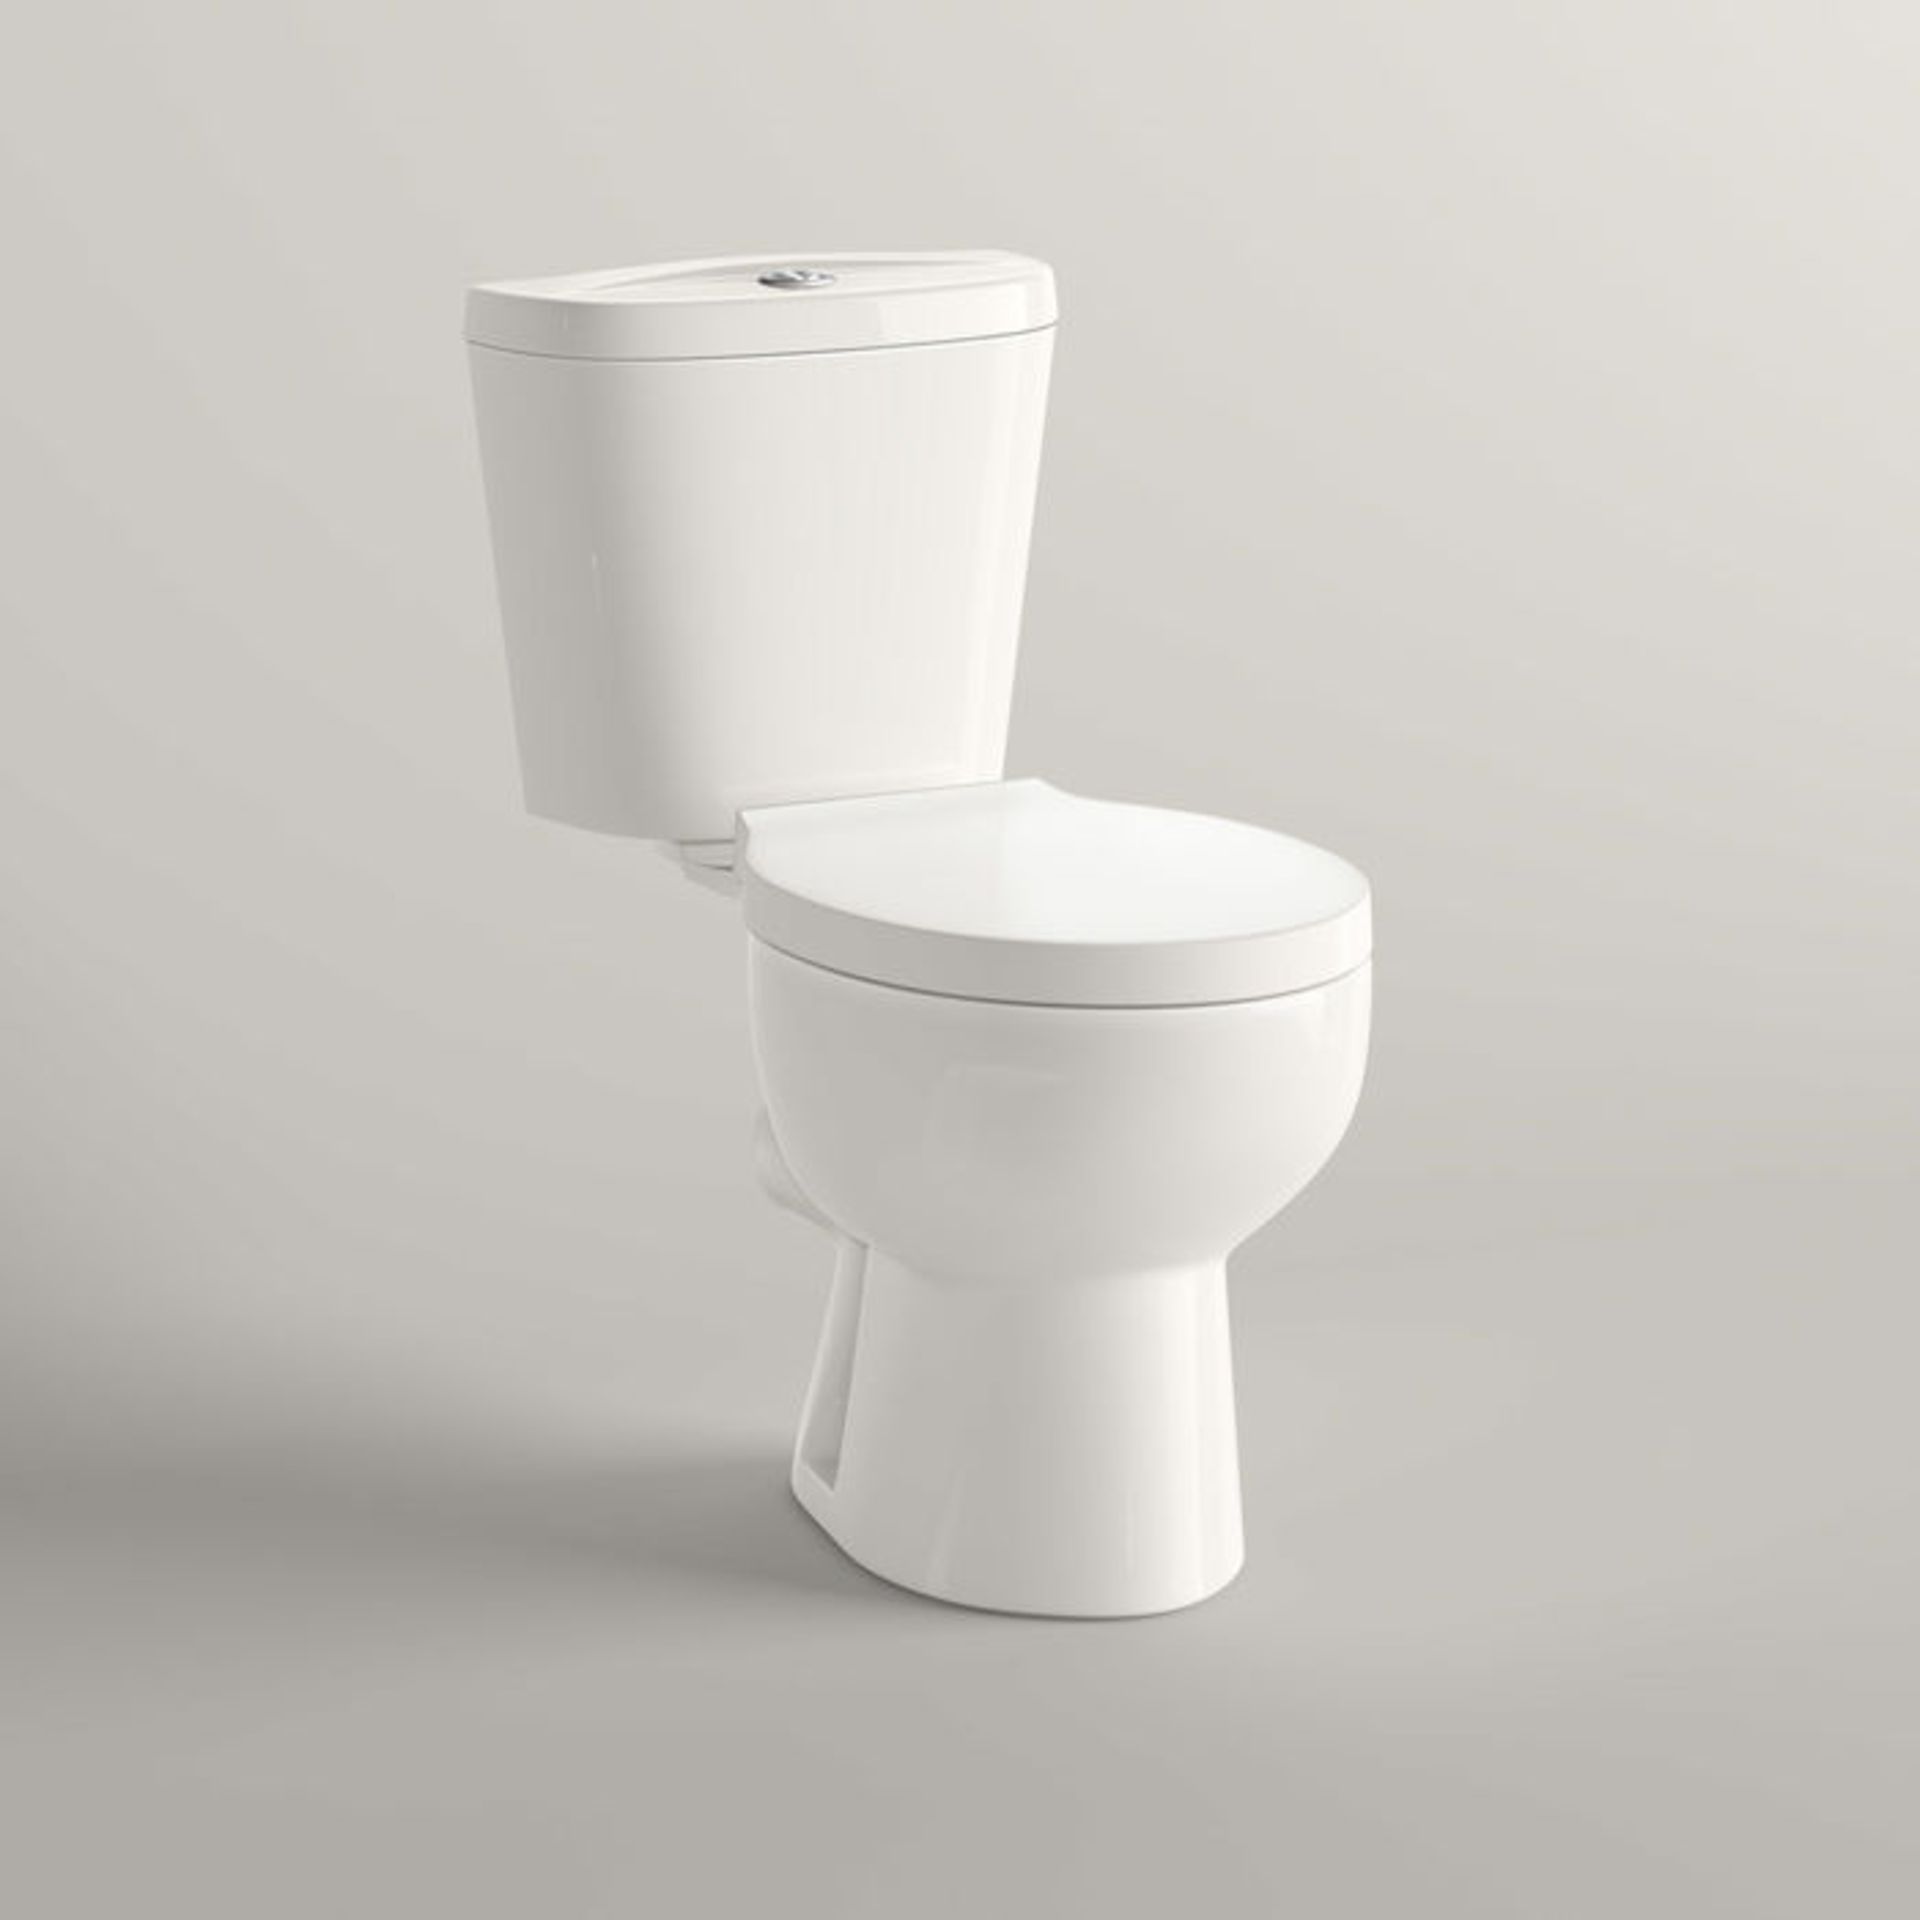 NEW Quartz Close Coupled Toilet.. We love this because it is simply great value! Made from Wh... - Image 2 of 2